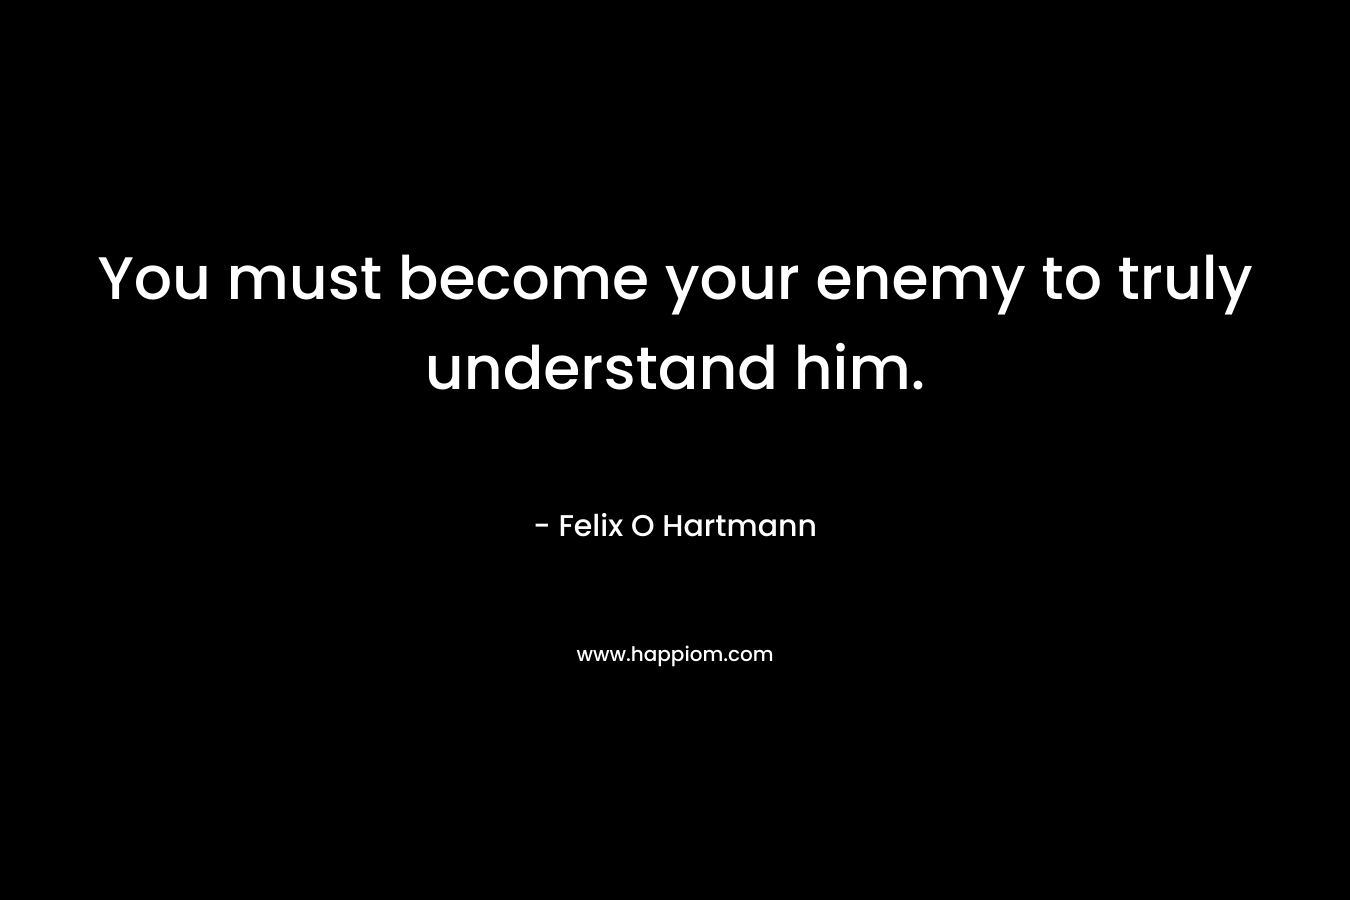 You must become your enemy to truly understand him.